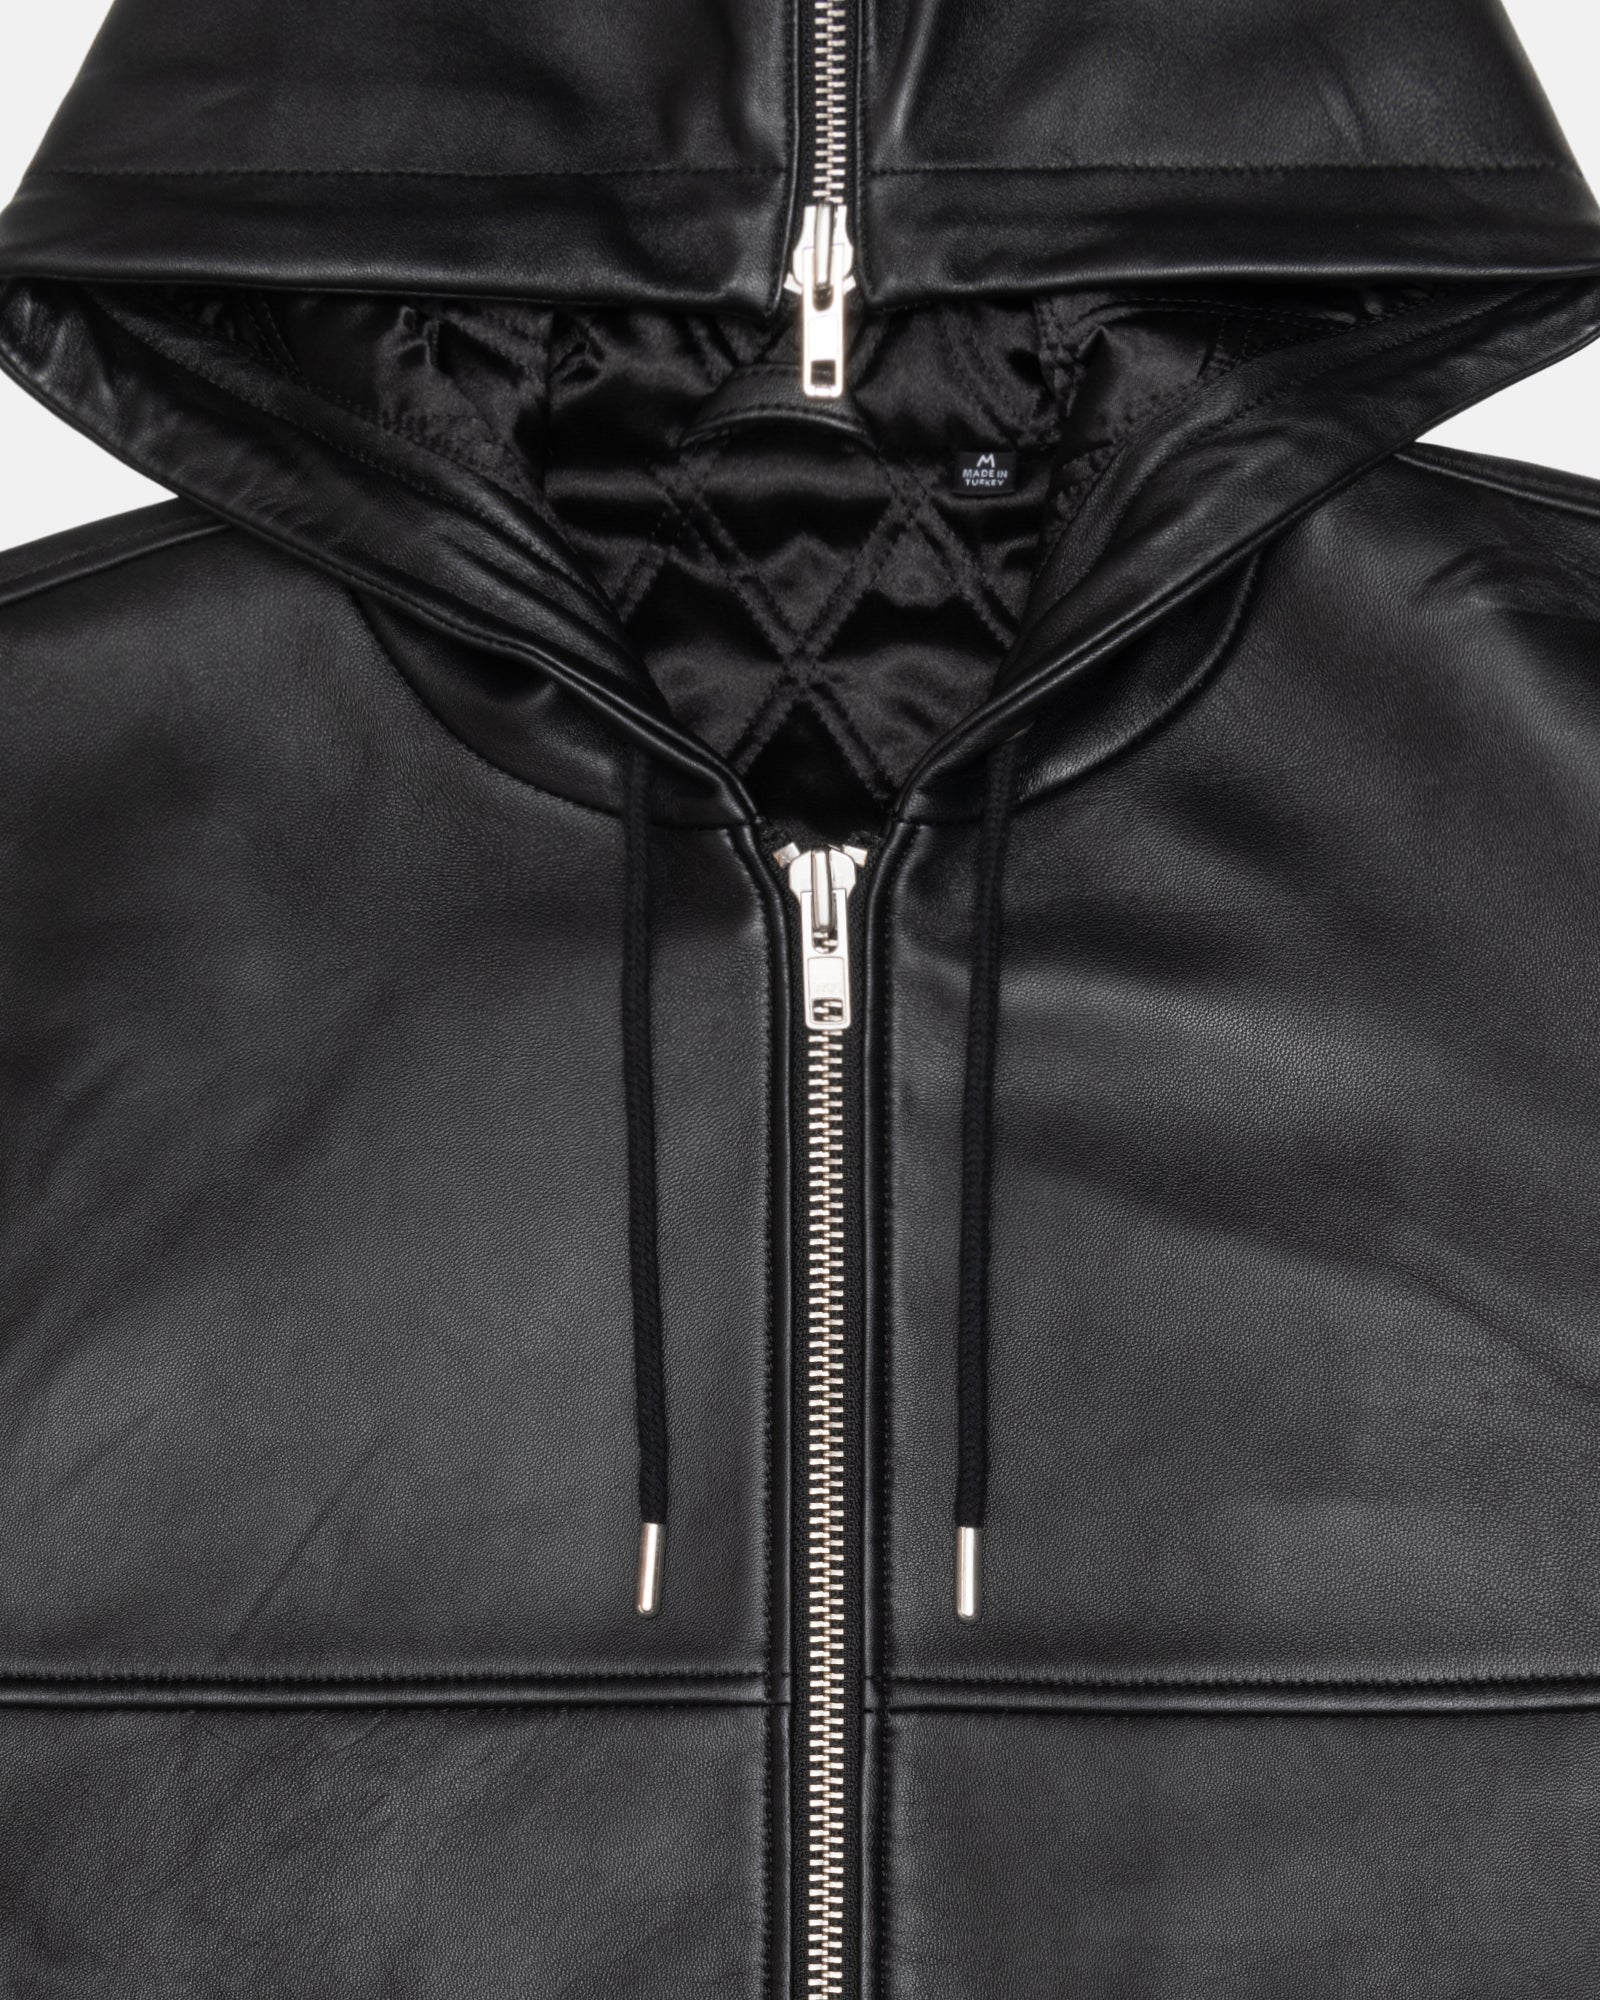 SS LINK LEATHER BOMBER